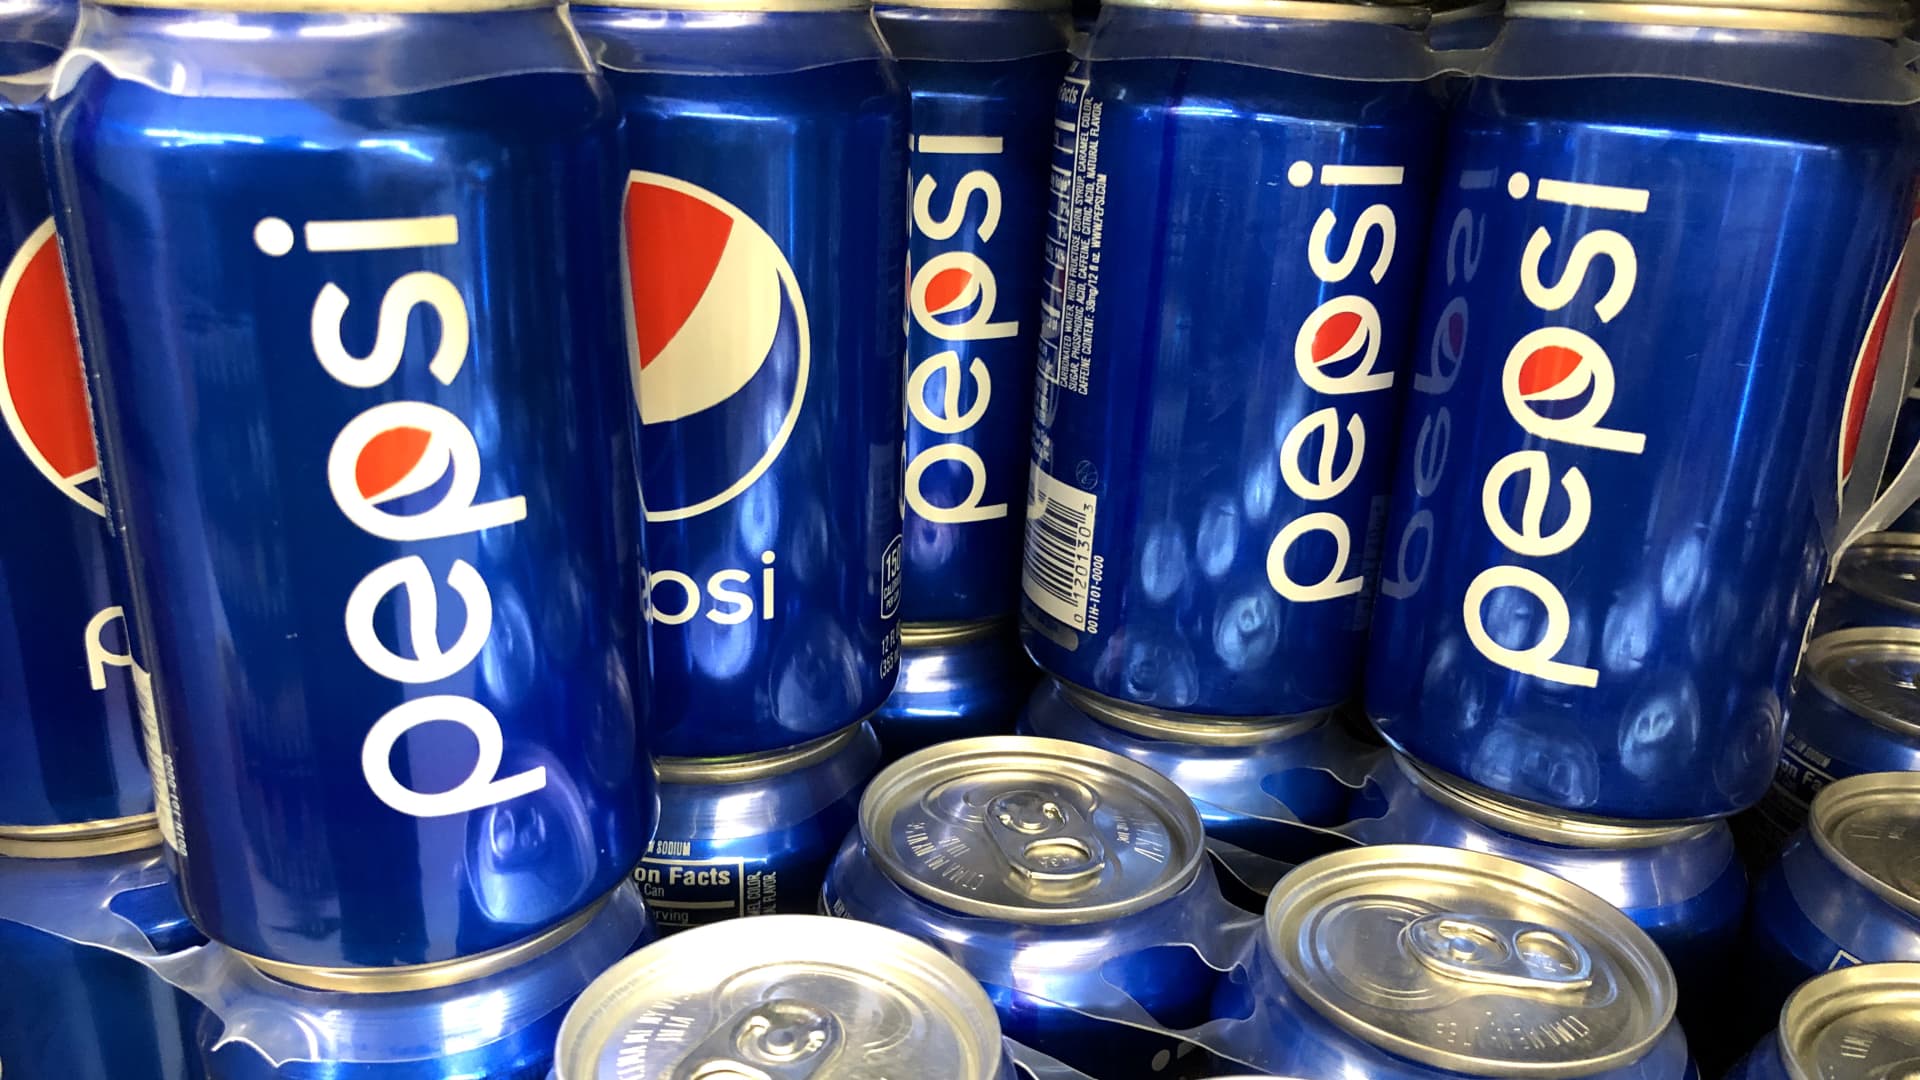 PepsiCo plans to cut hundreds of corporate jobs, report says